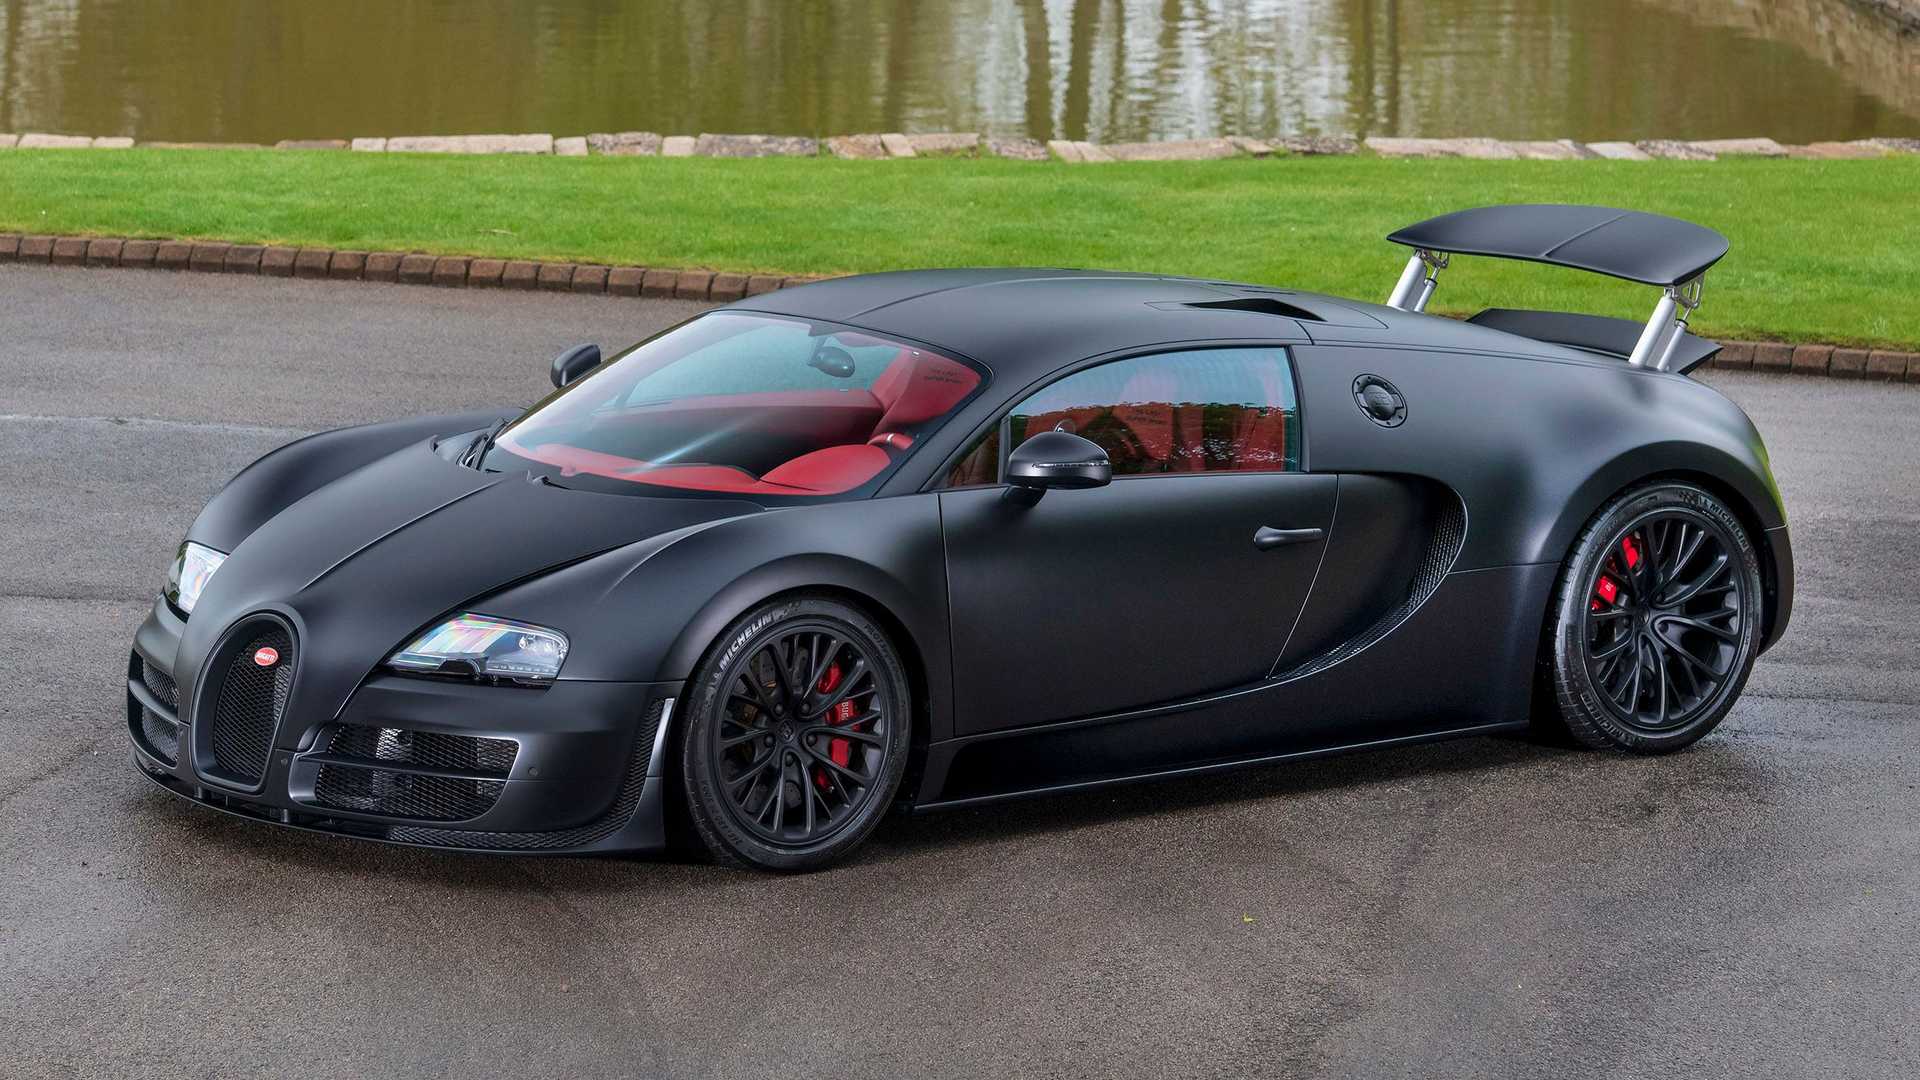 Detail Images Of The Bugatti Veyron Nomer 13